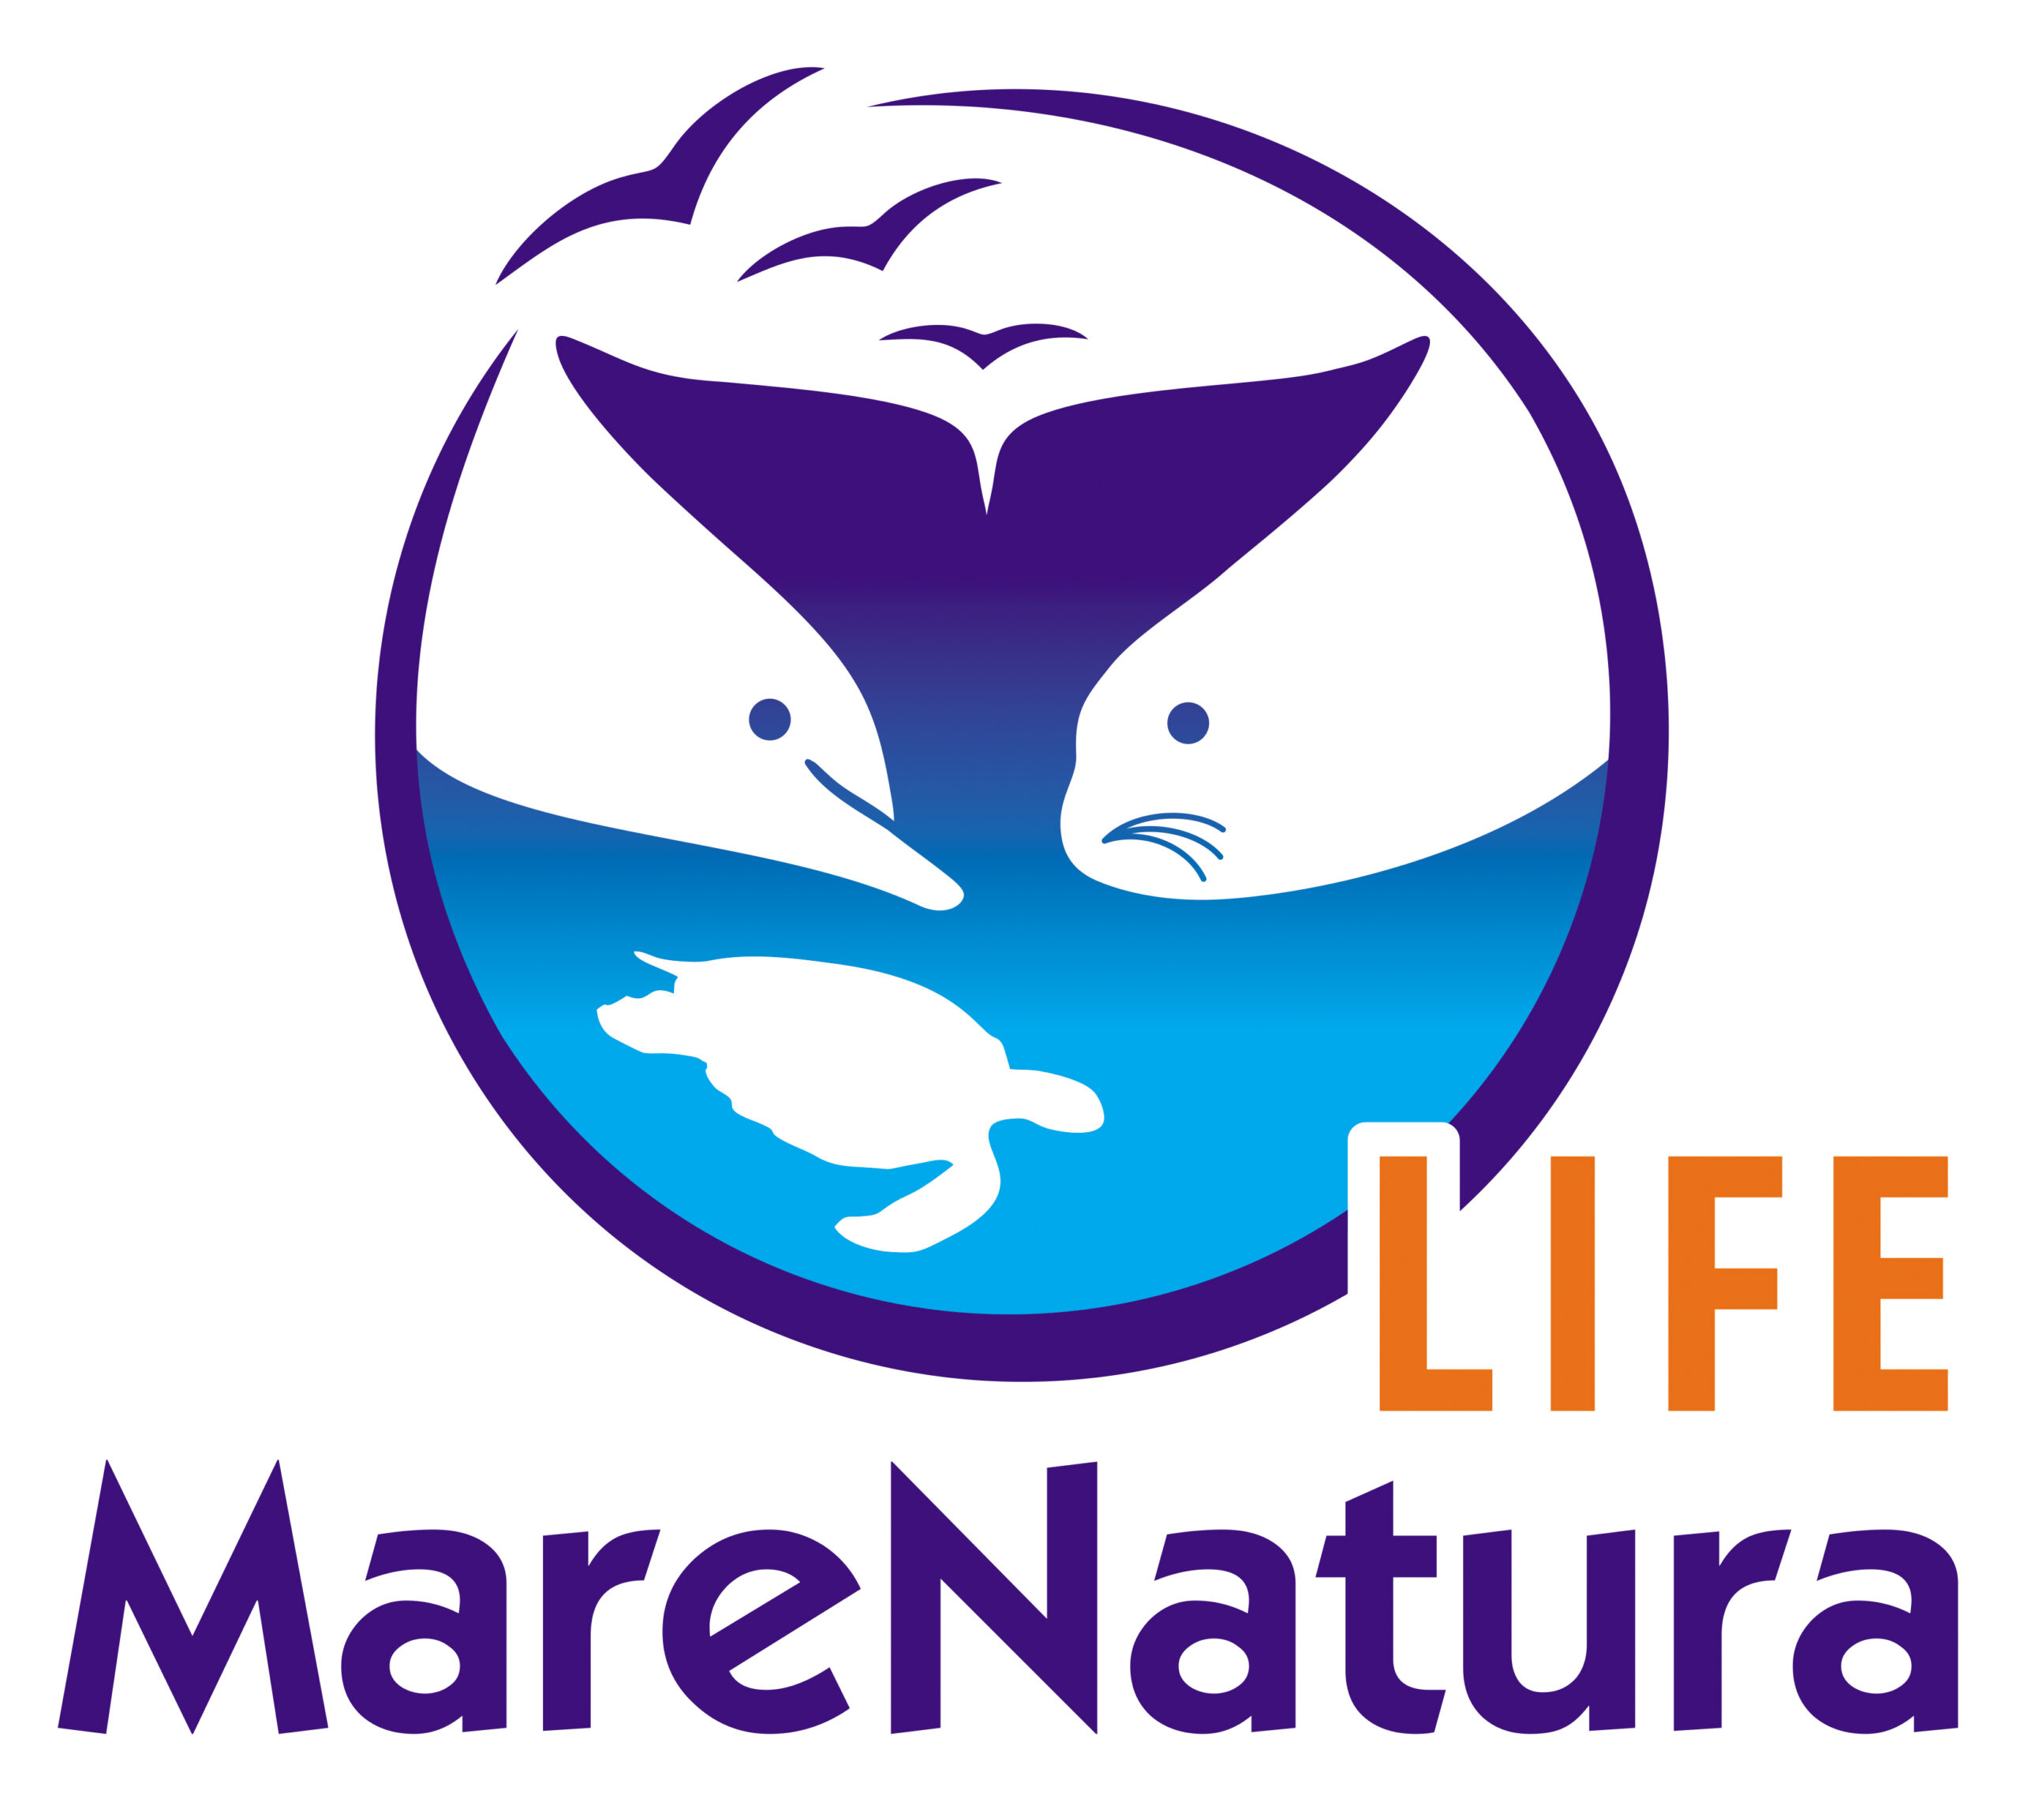 LIFE MareNatura – The largest marine biodiversity project implemented in Greece